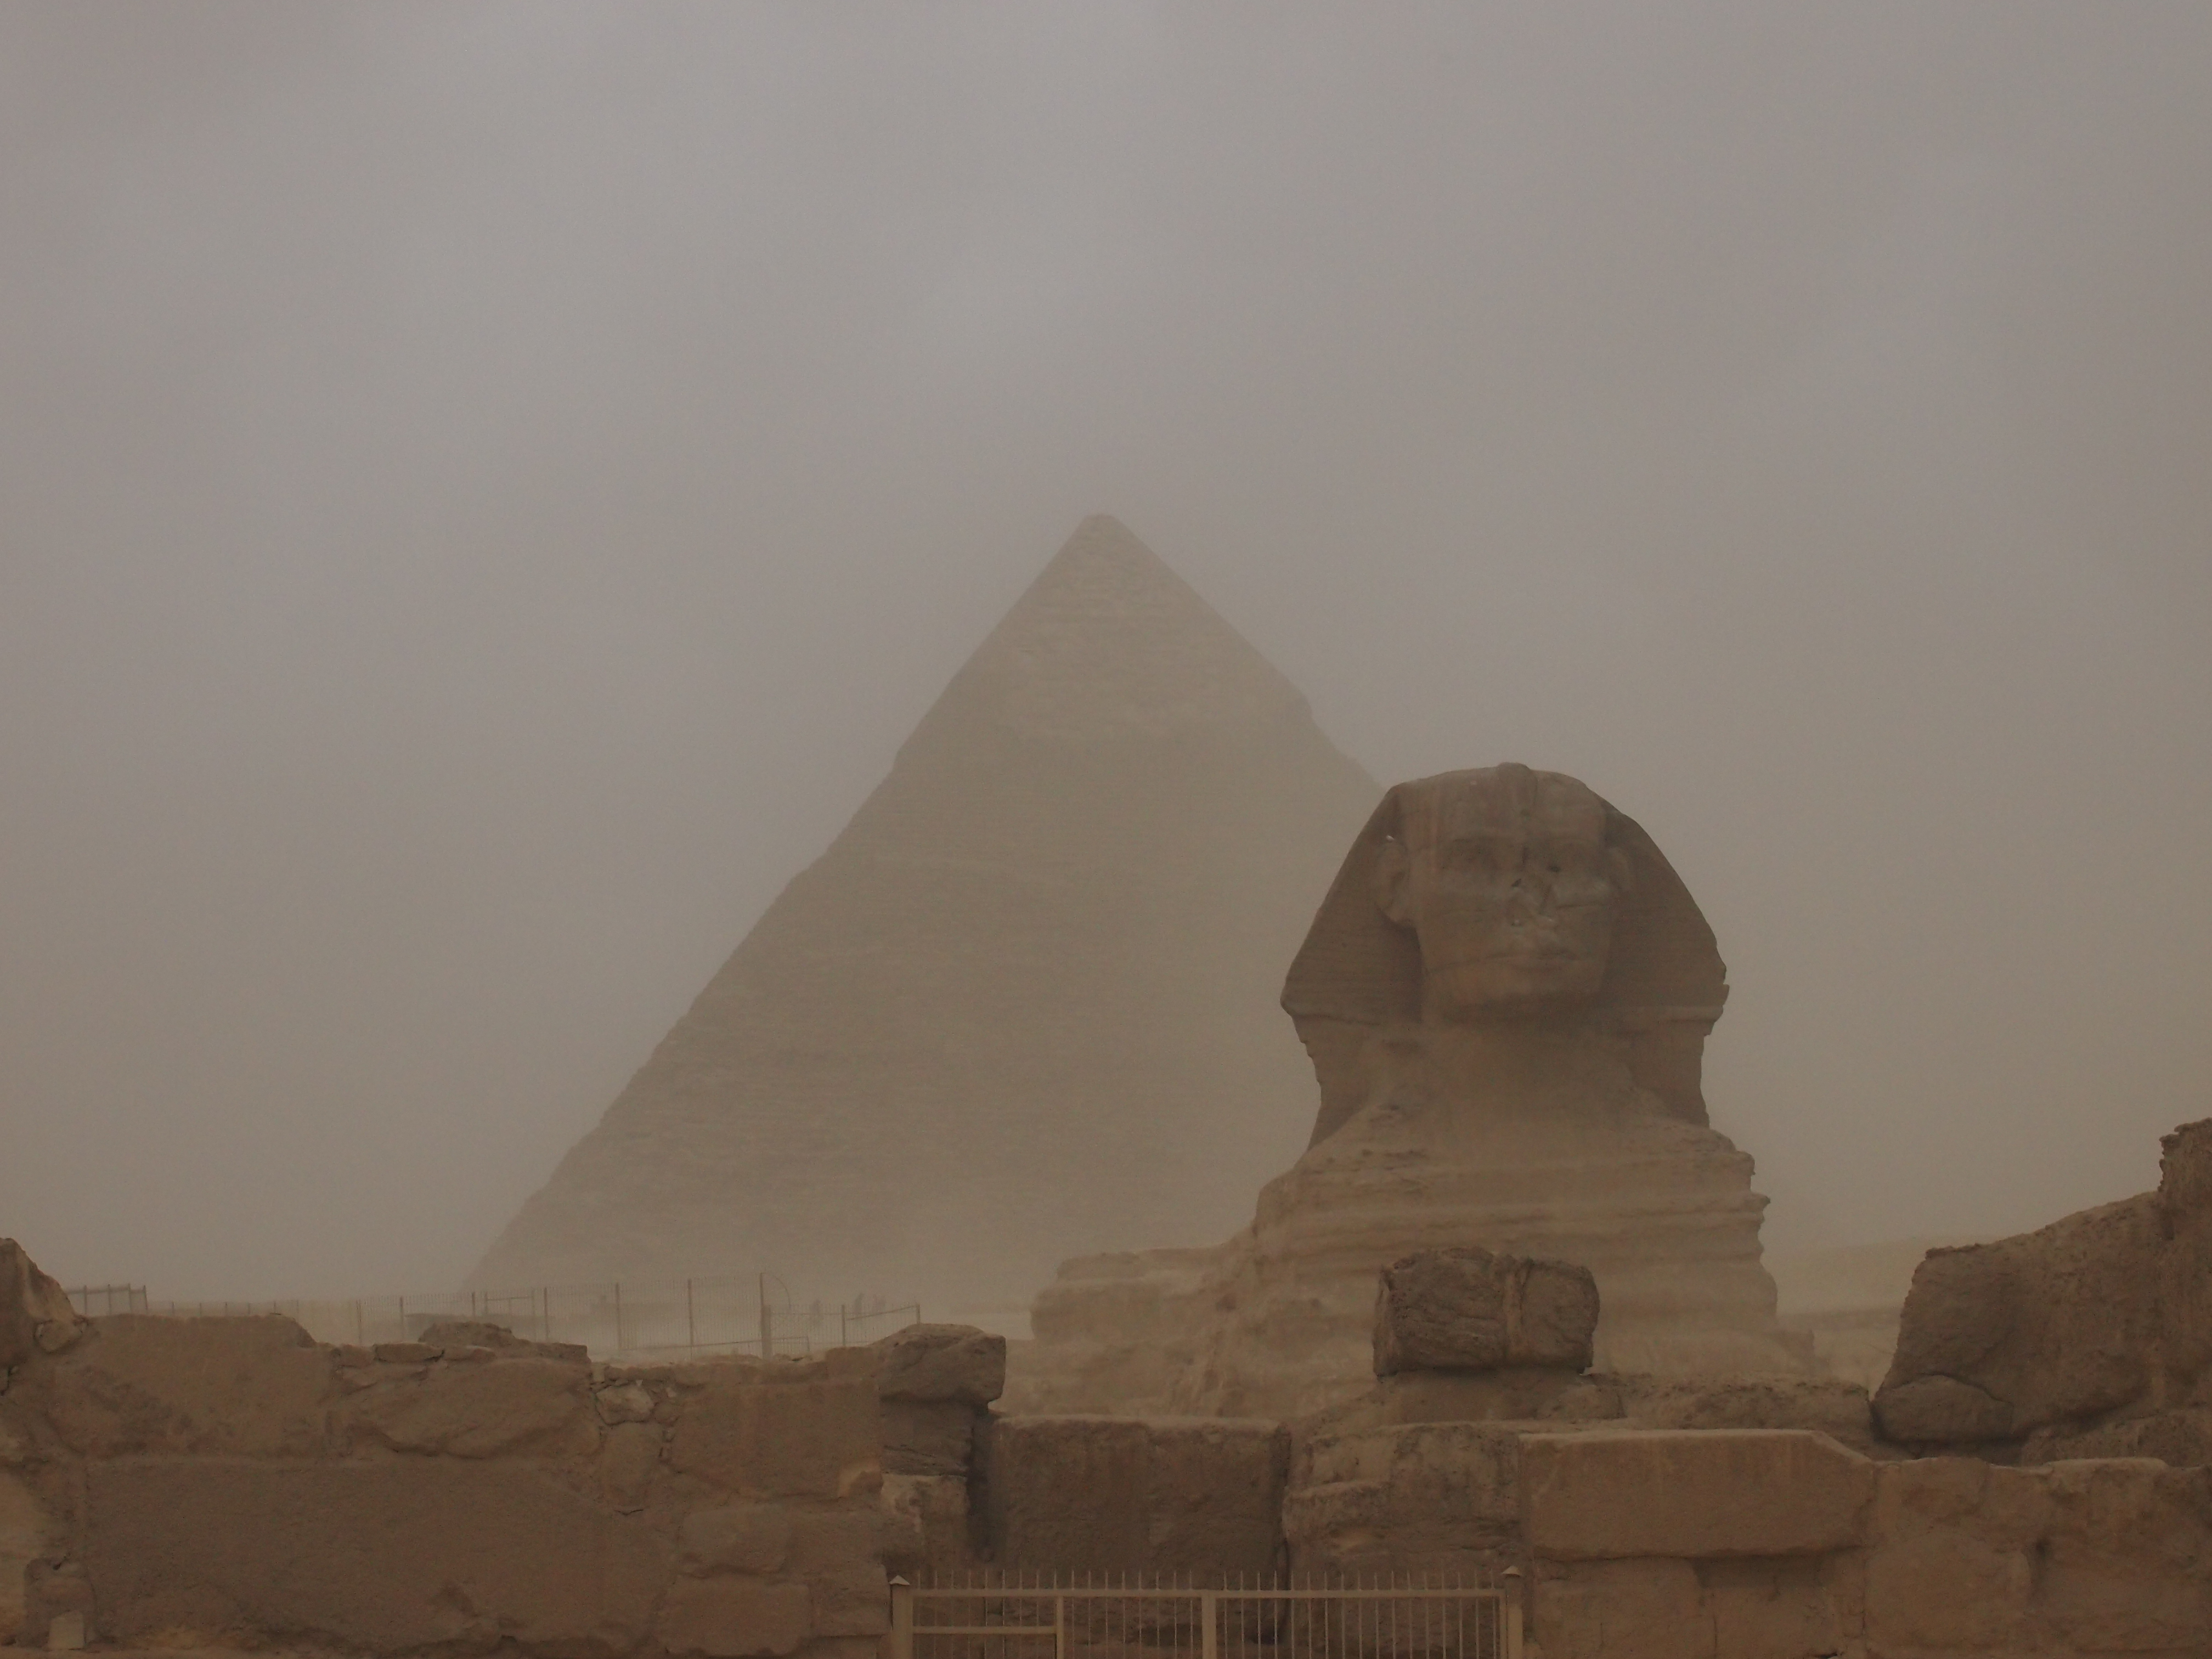 A visit to the pyramids | Another Travel Blog